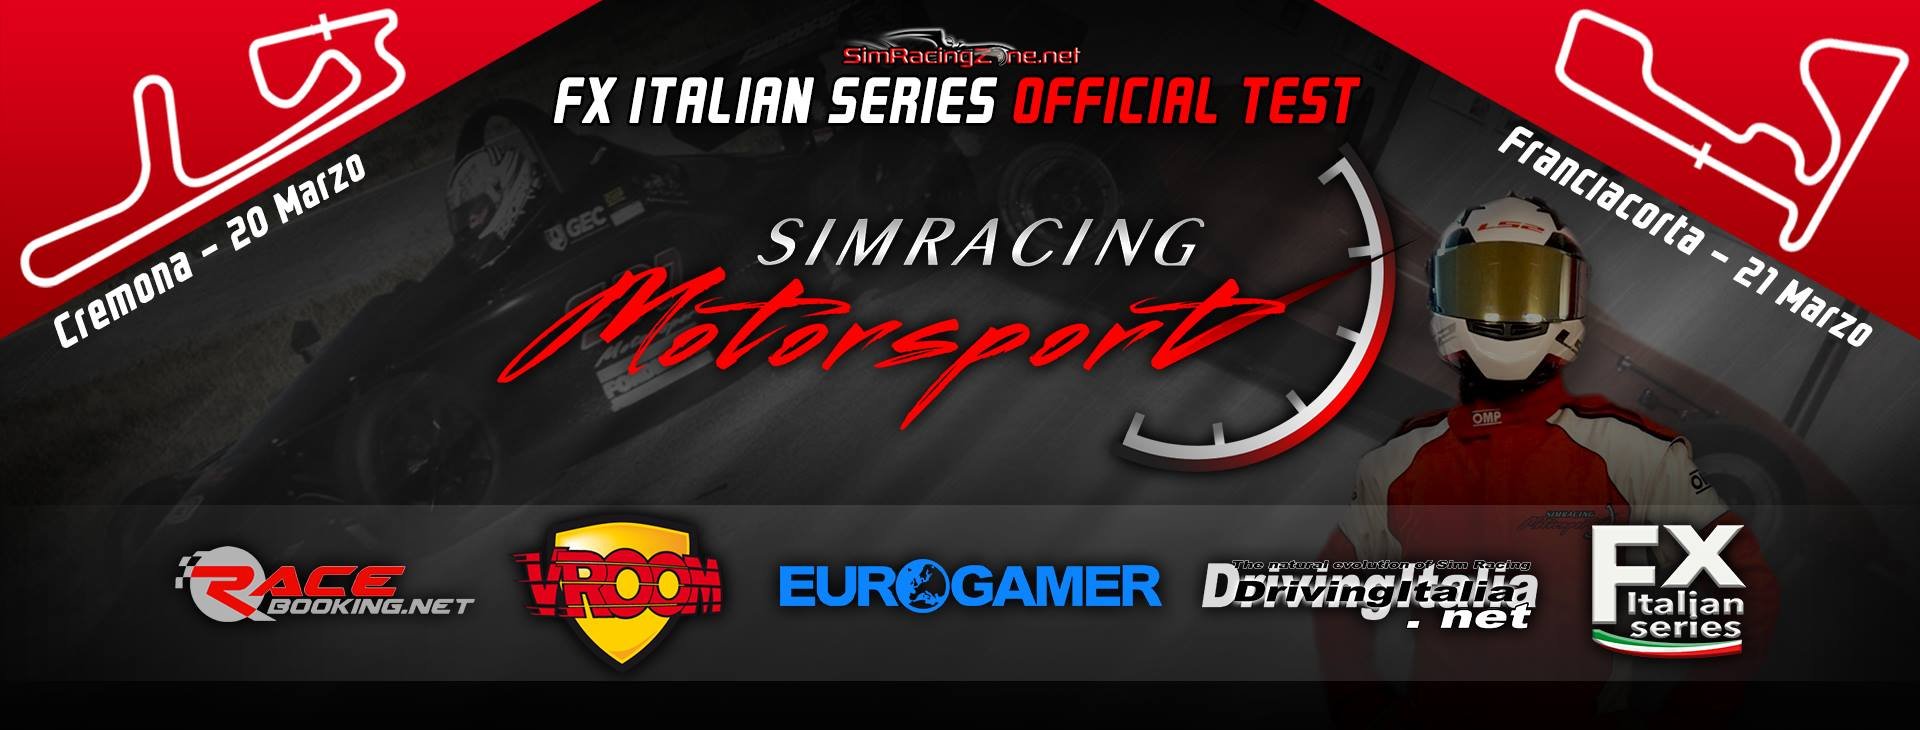 More information about "FX Series: i simdrivers vanno in pista!"